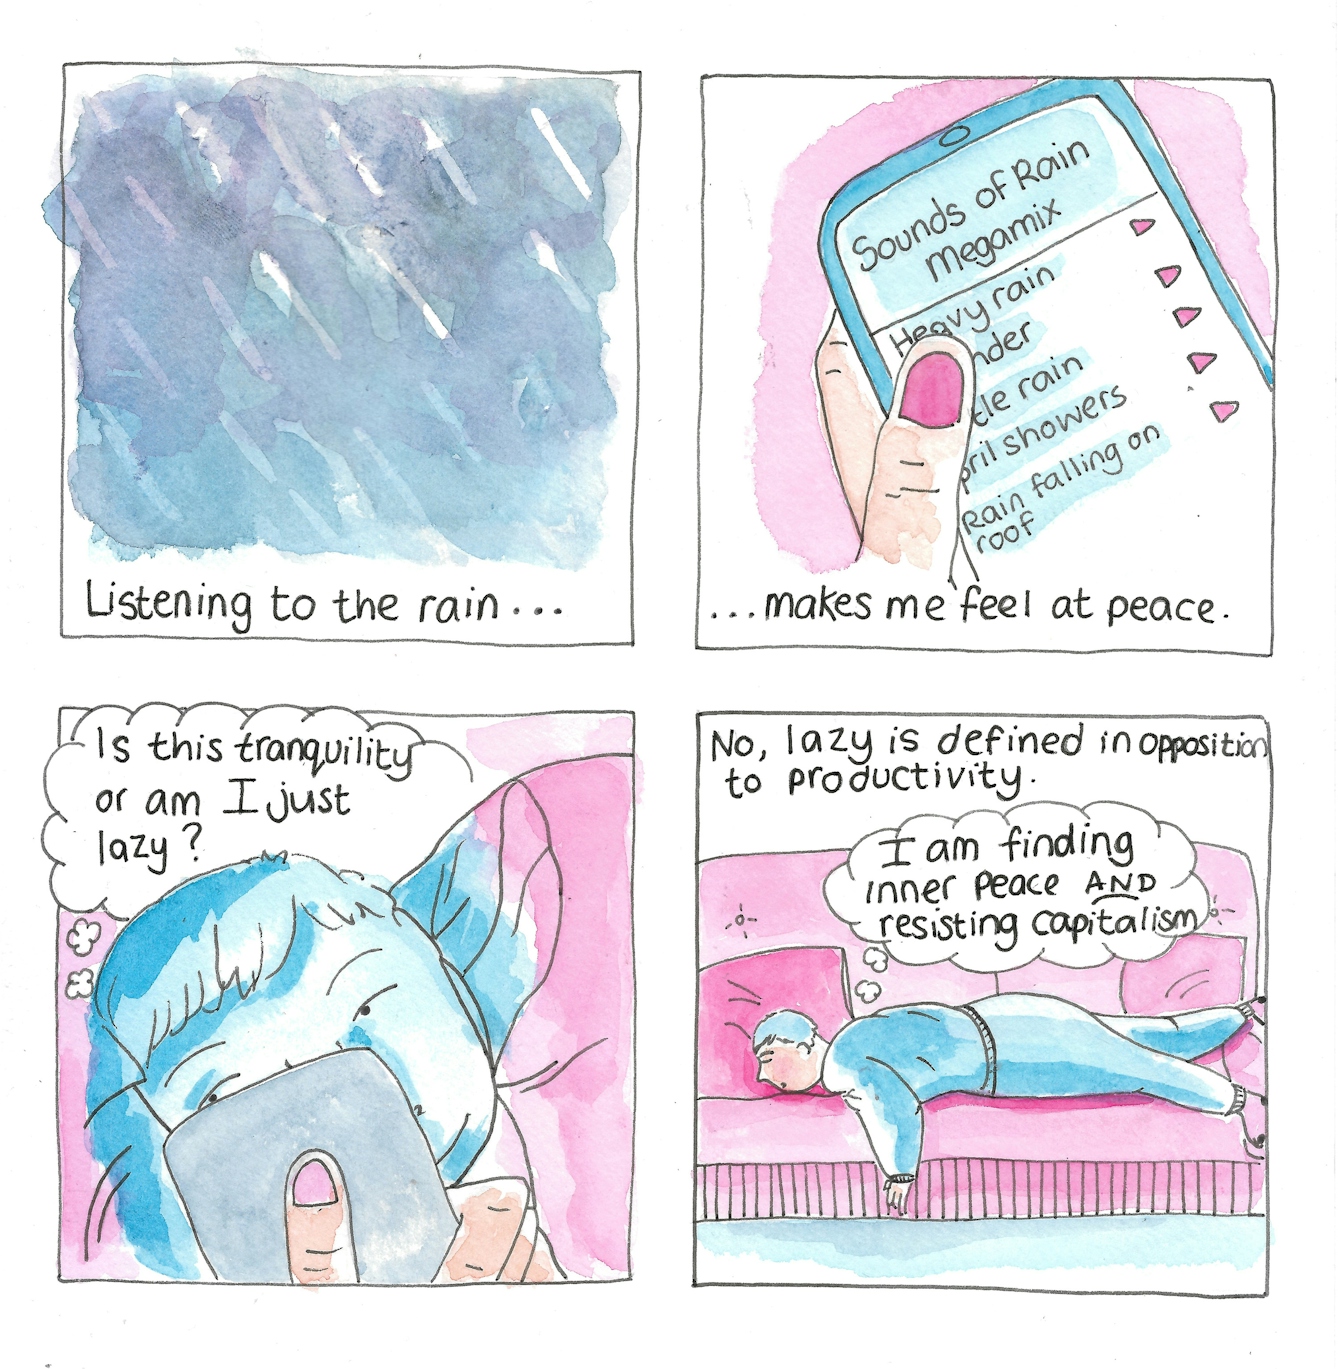 Panel 1: Dark and murky clouds revealing a rain storm. The caption reads: 'Listening to the rain...'

Panel 2: A finger scrolls down a playlist of rain sounds titled 'Sounds of Rain Megamix'. Options include Heavy rain, thunder, Gentle rain, April showers, Rain falling on roof. The caption continues ...'Makes me feel at peace.'

Panel 3: As a girl scrolls her phone for rain sounds, the screen lighting up her face she wonders to herself 'Is this tranquility or am I just lazy?'

Panel 4: The girl laying face down on a sofa. The caption continues: 'No, lazy is defined in opposition to productivity. The girl thinks to herself: 'I am finding inner peace AND resisting capitalism.'